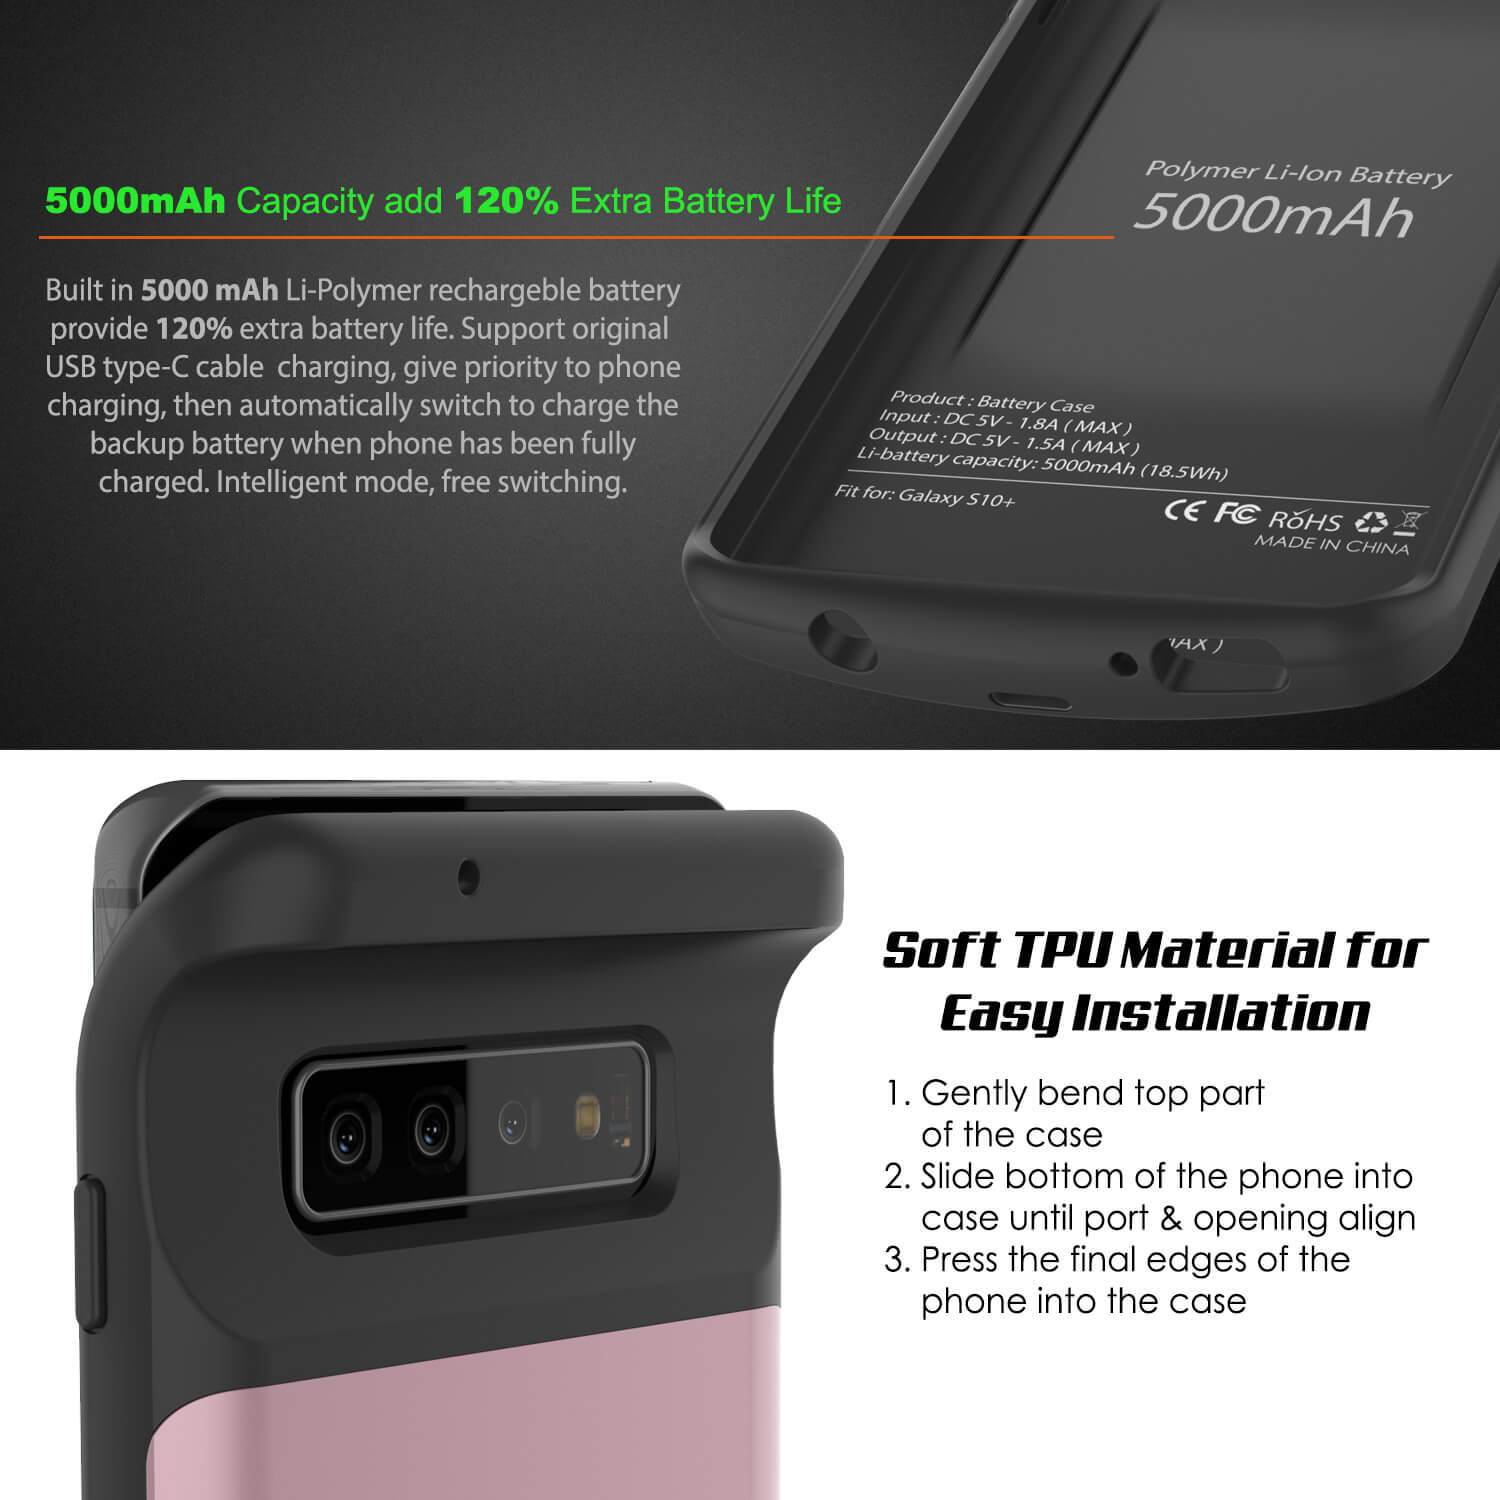 PunkJuice S10+ Plus Battery Case Rose - Fast Charging Power Juice Bank with 5000mAh